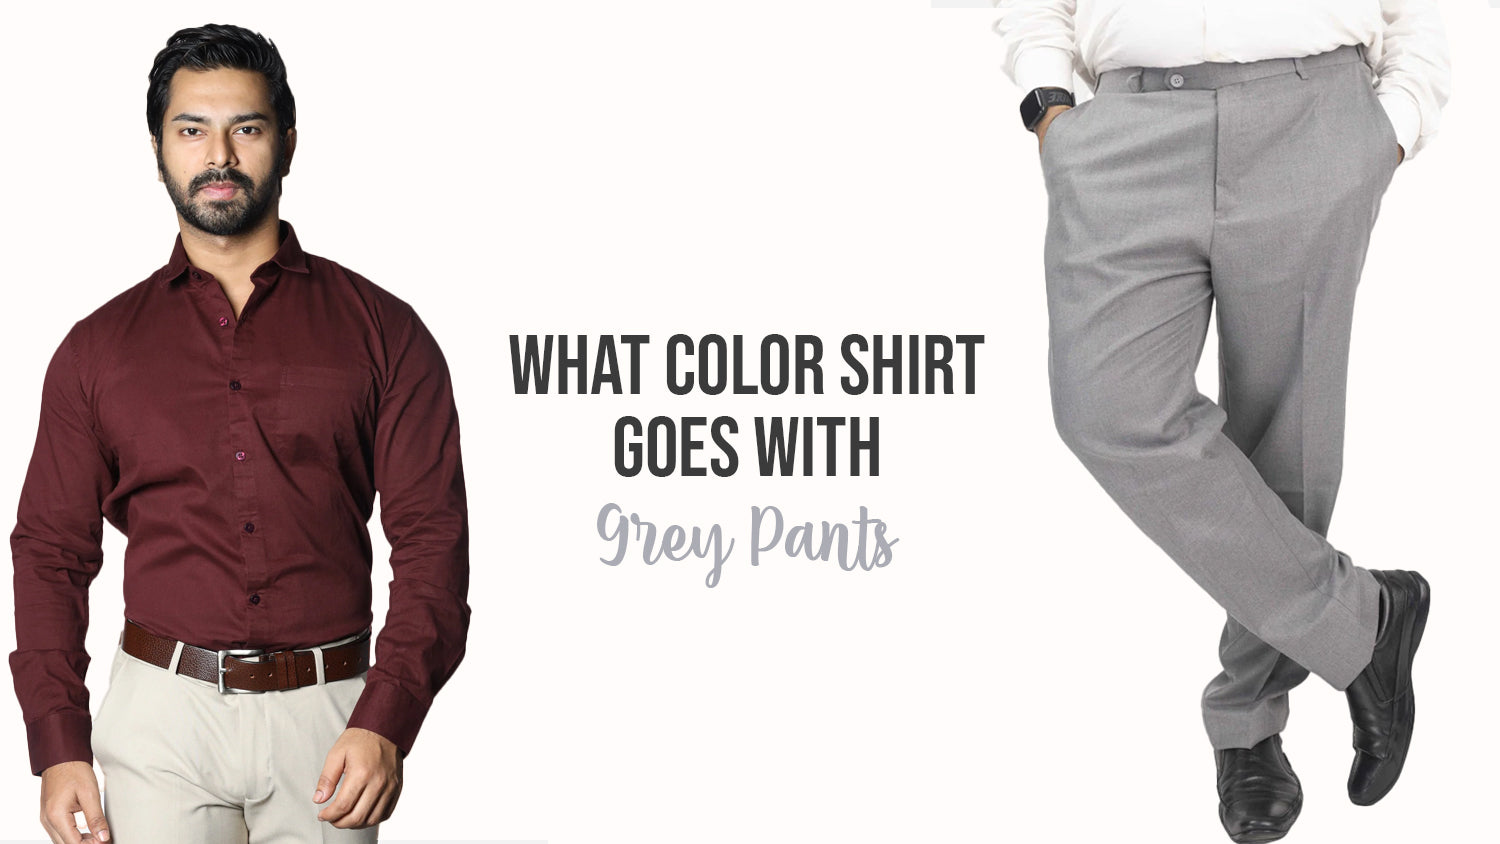 What color of pants should I wear with a maroon shirt? - Quora